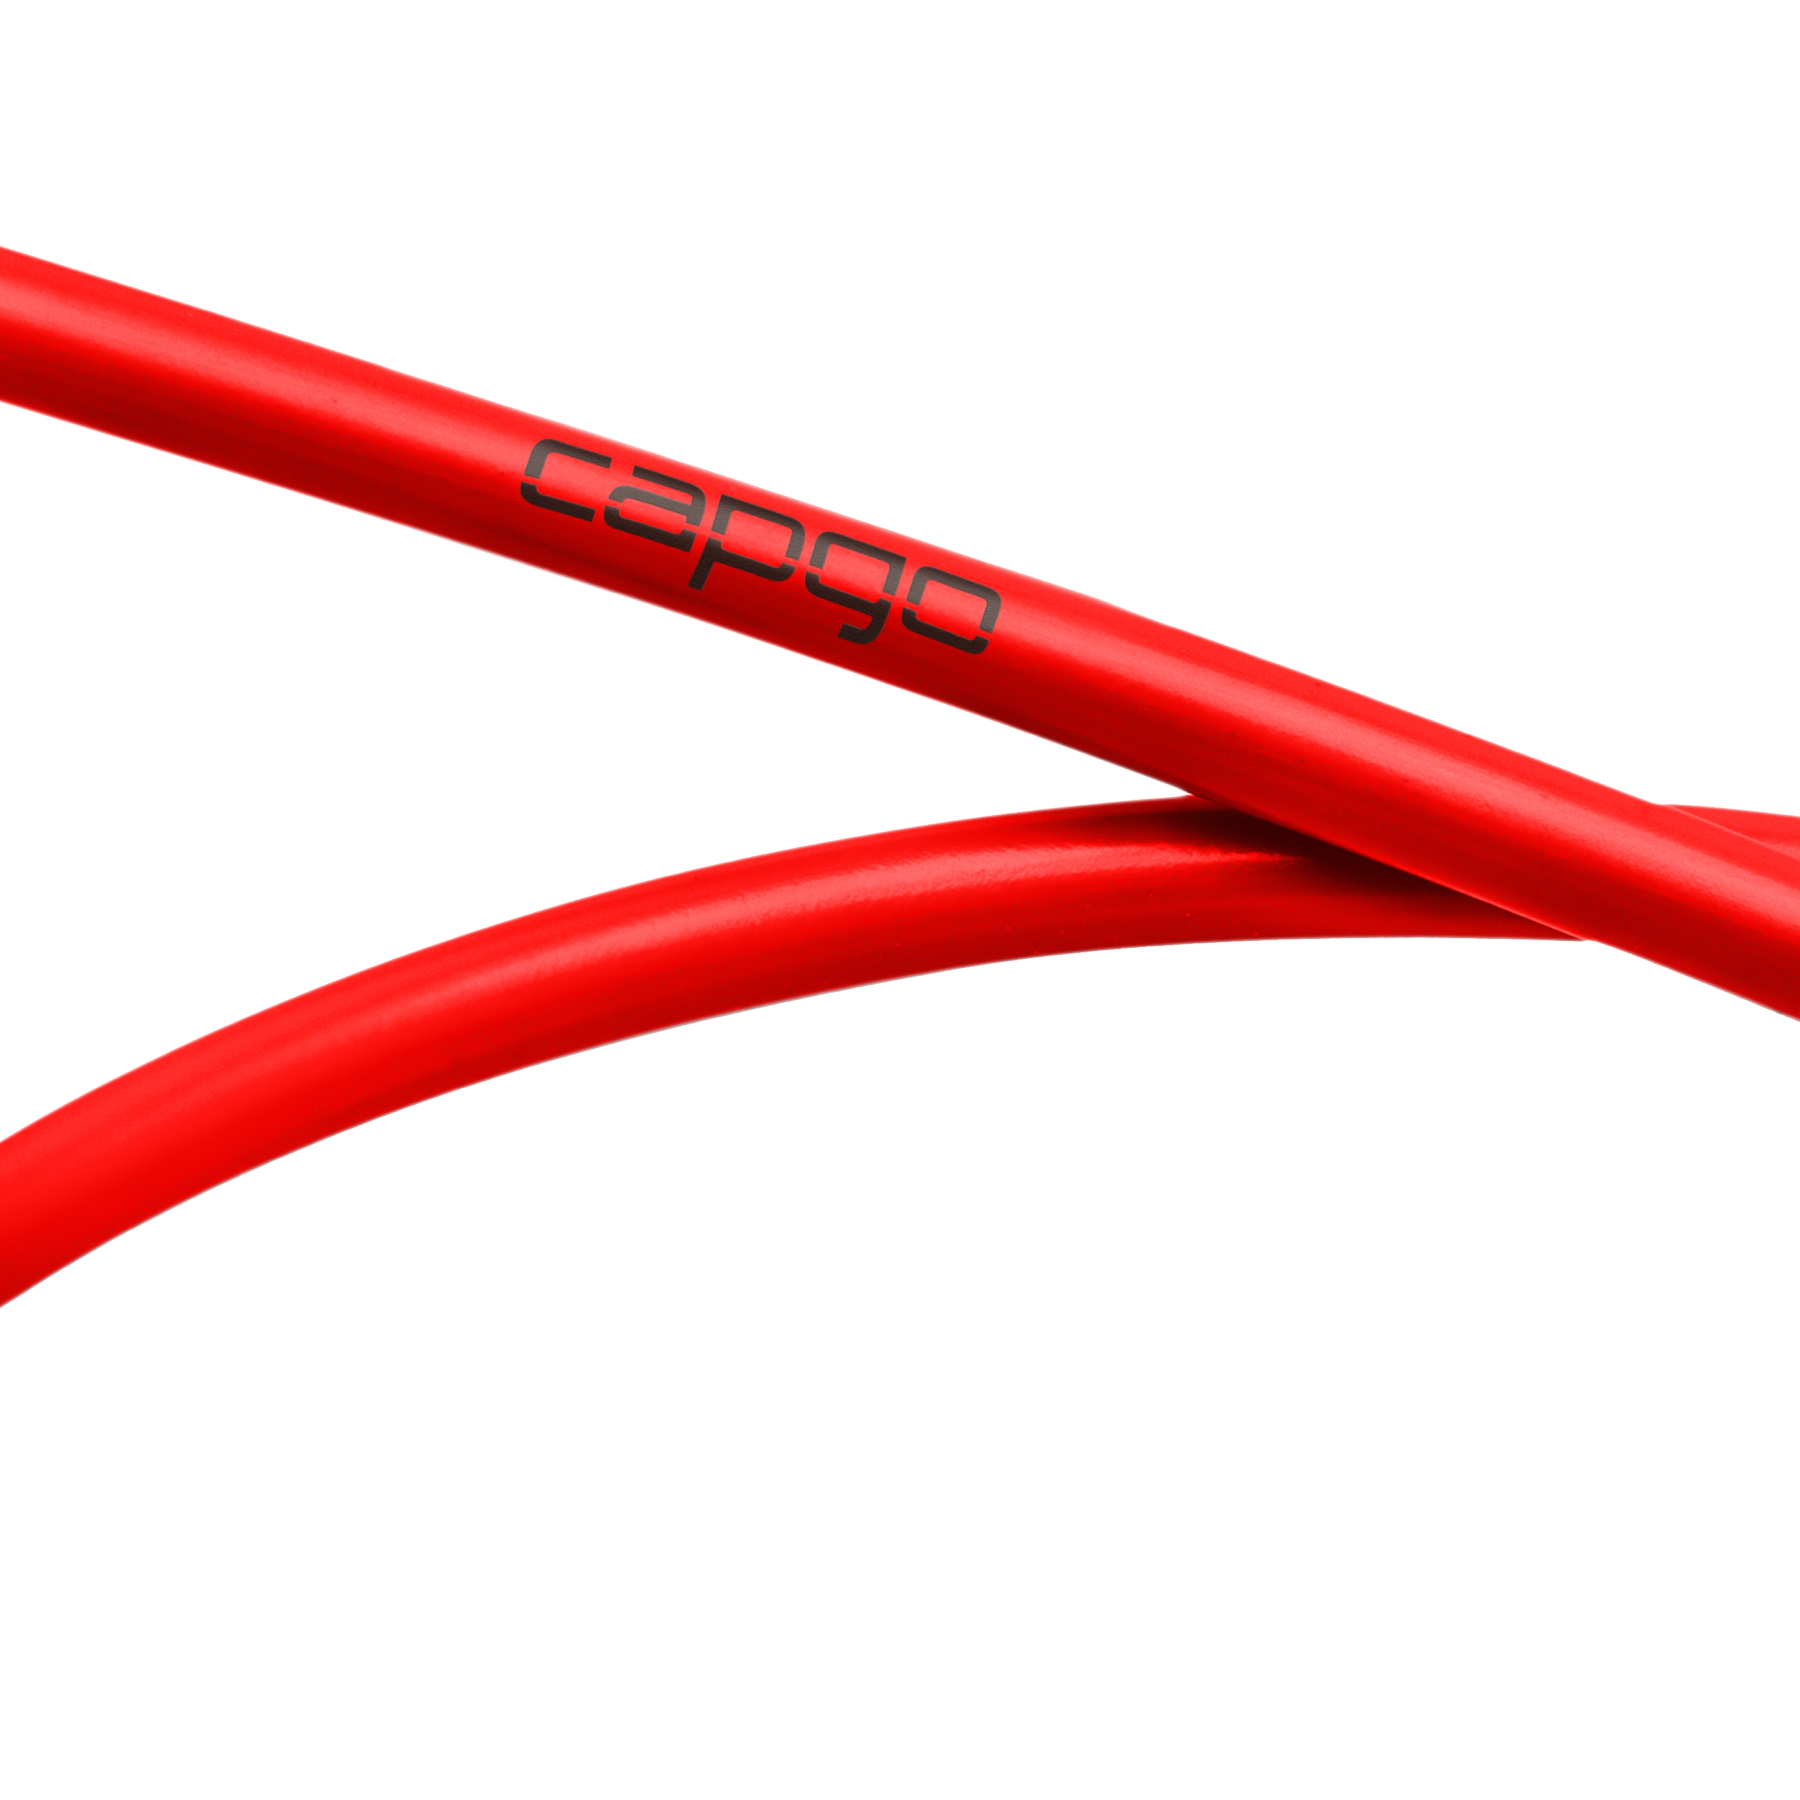 Picture of capgo Blue Line Brake Cable Housing - 5 mm - PTFE - 3000 mm - red